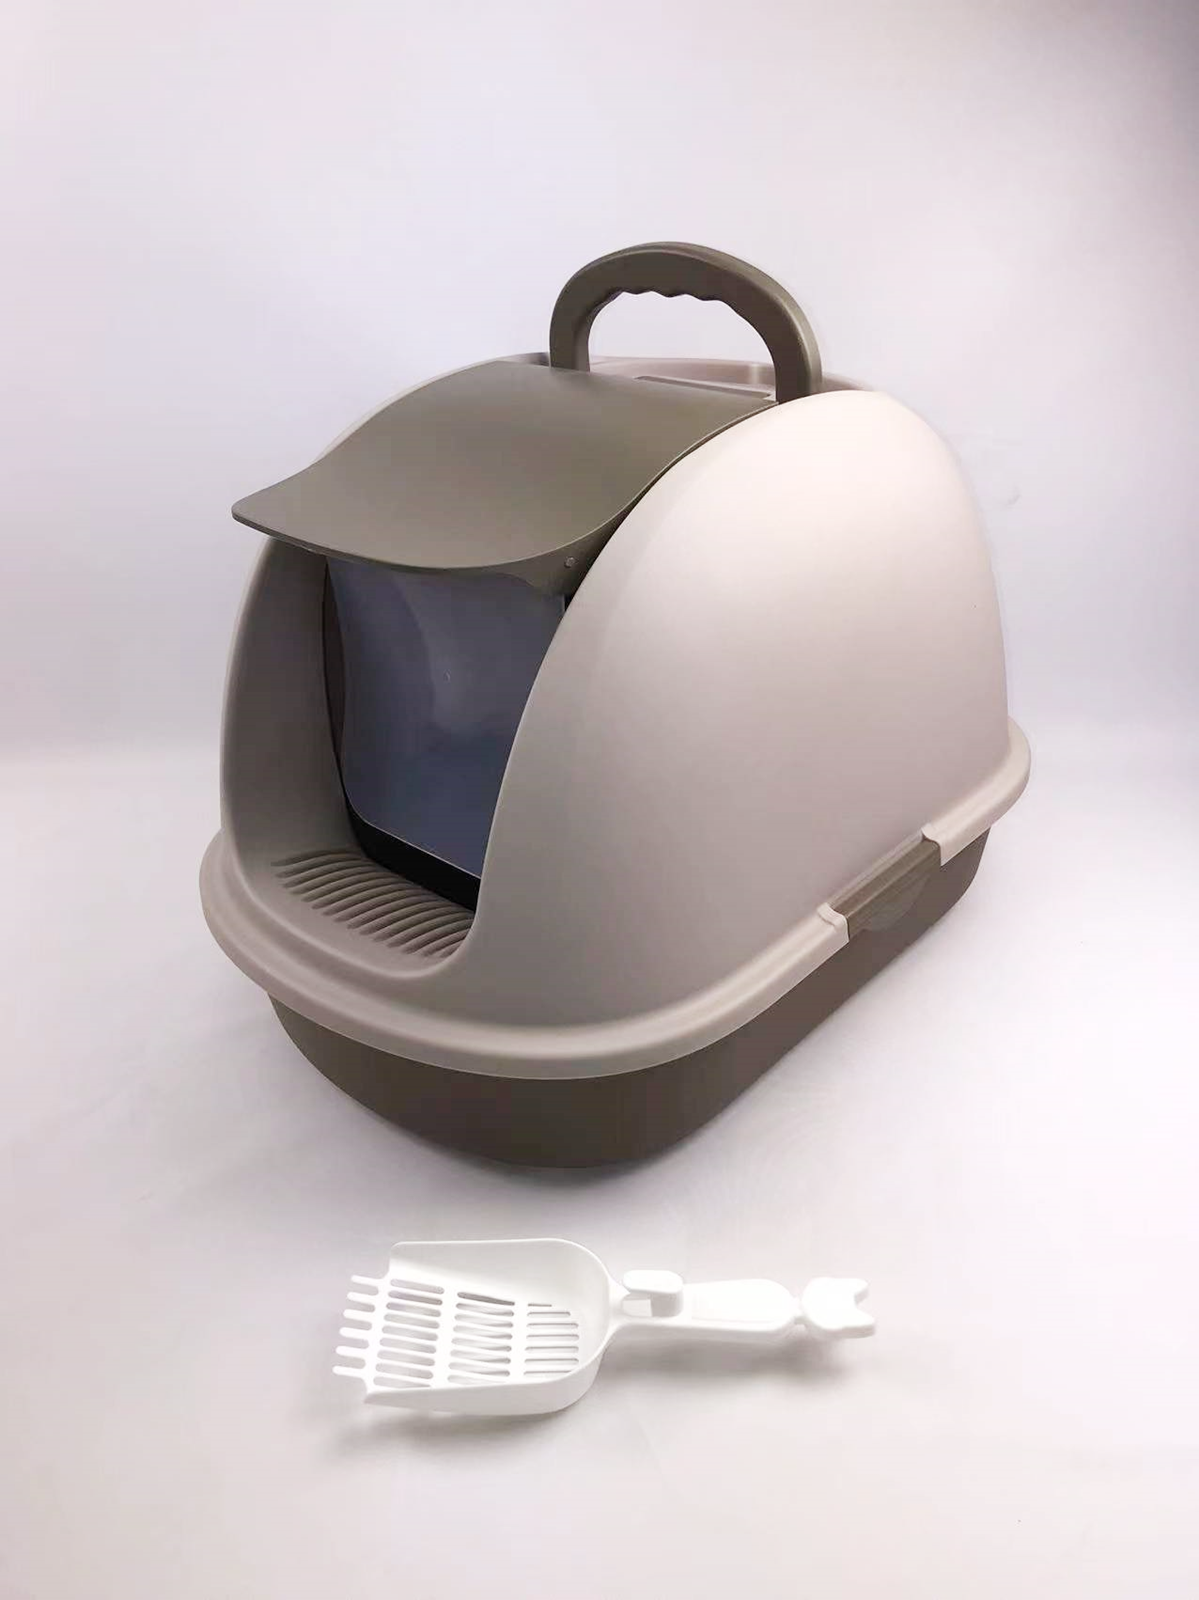 XL Portable Hooded Cat Toilet Litter Box Tray House w Charcoal Filter and Scoop Brown Deals499